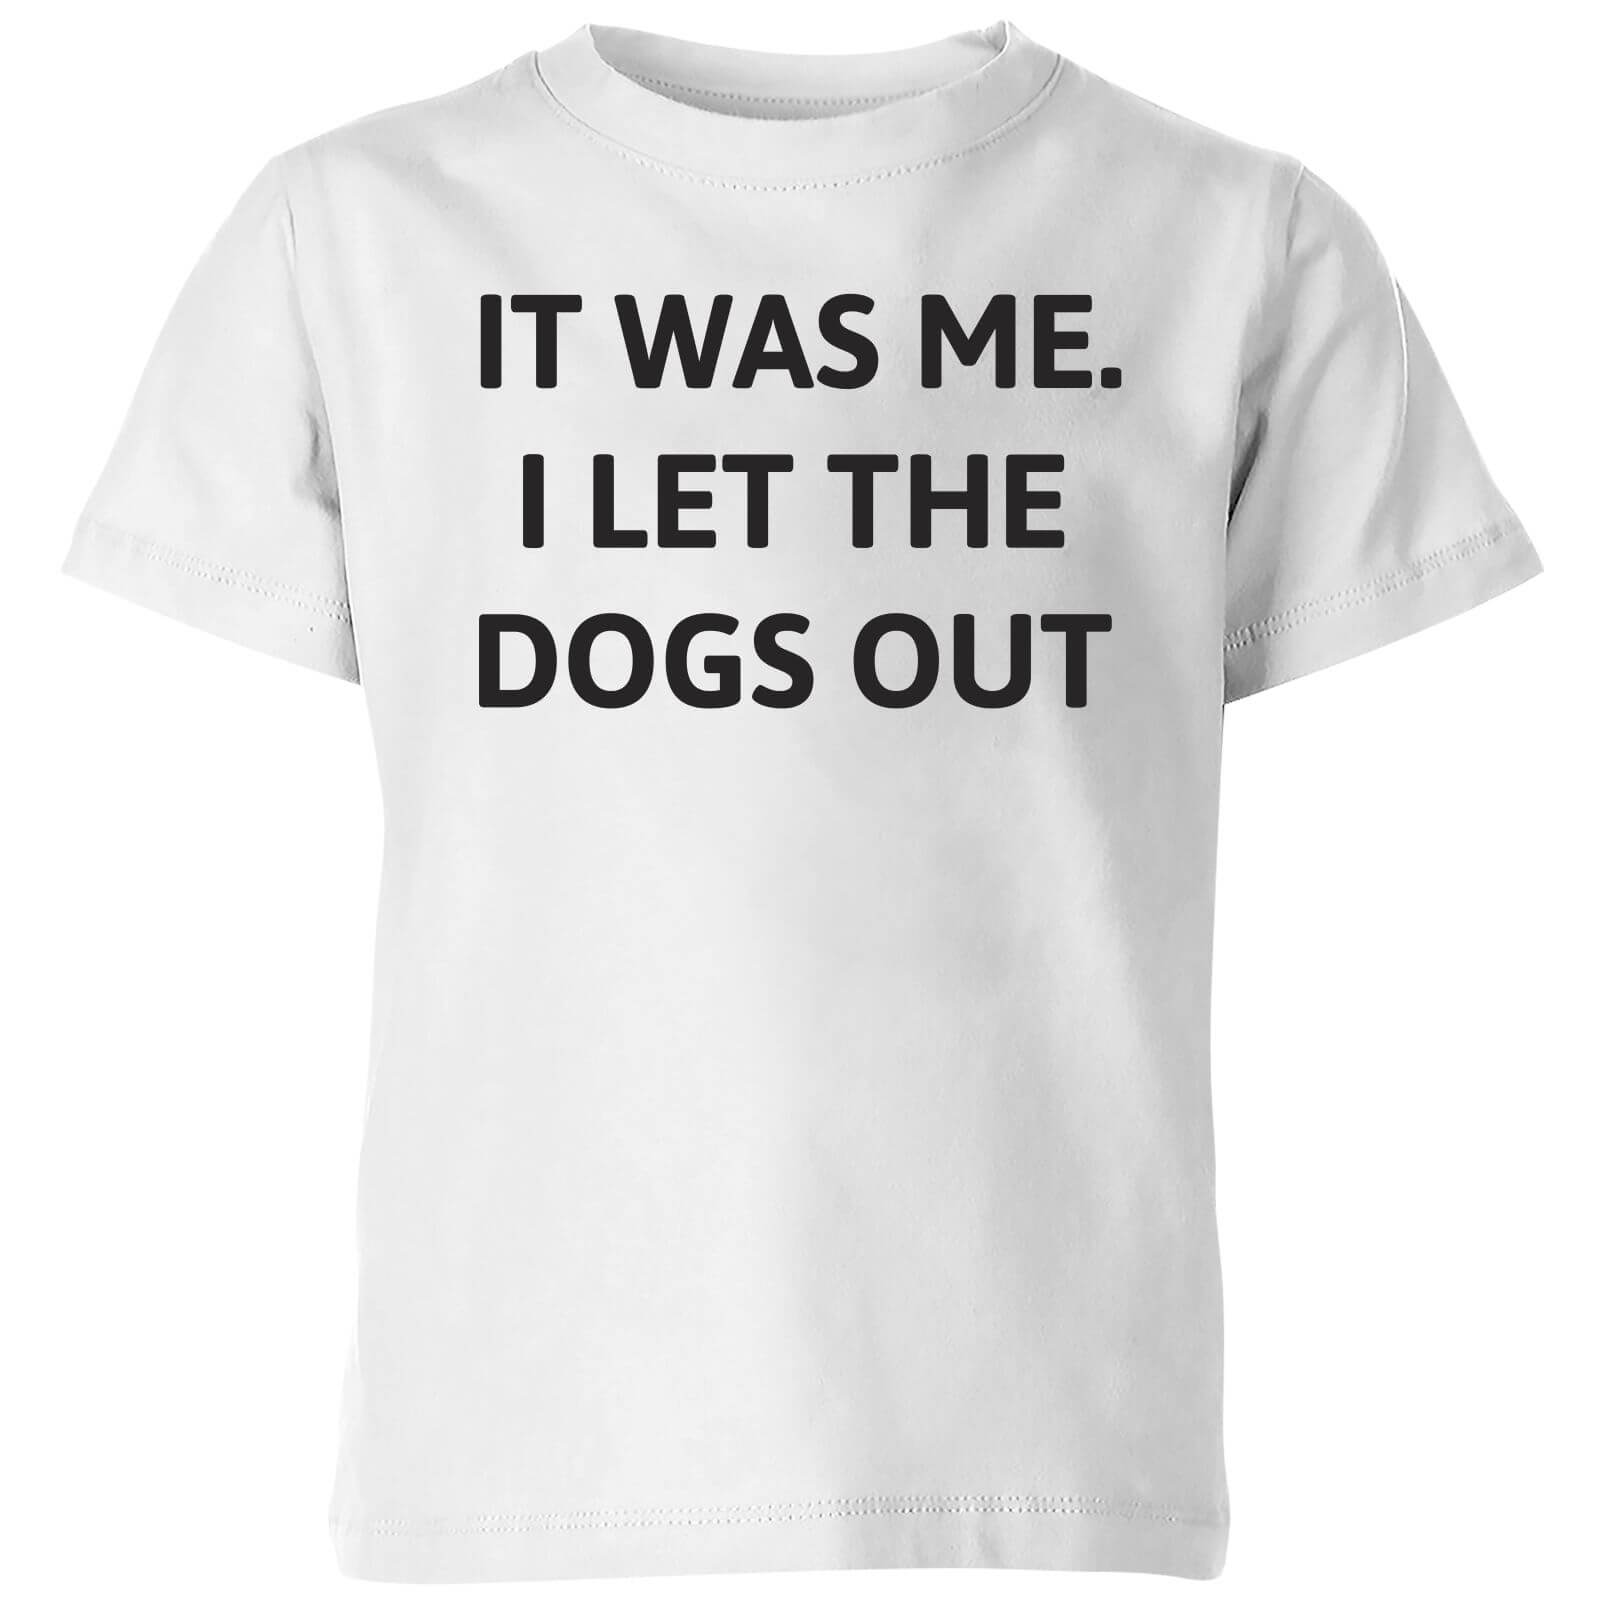 I Let The Dogs Out Kids' T-Shirt - White - 3-4 Years - White